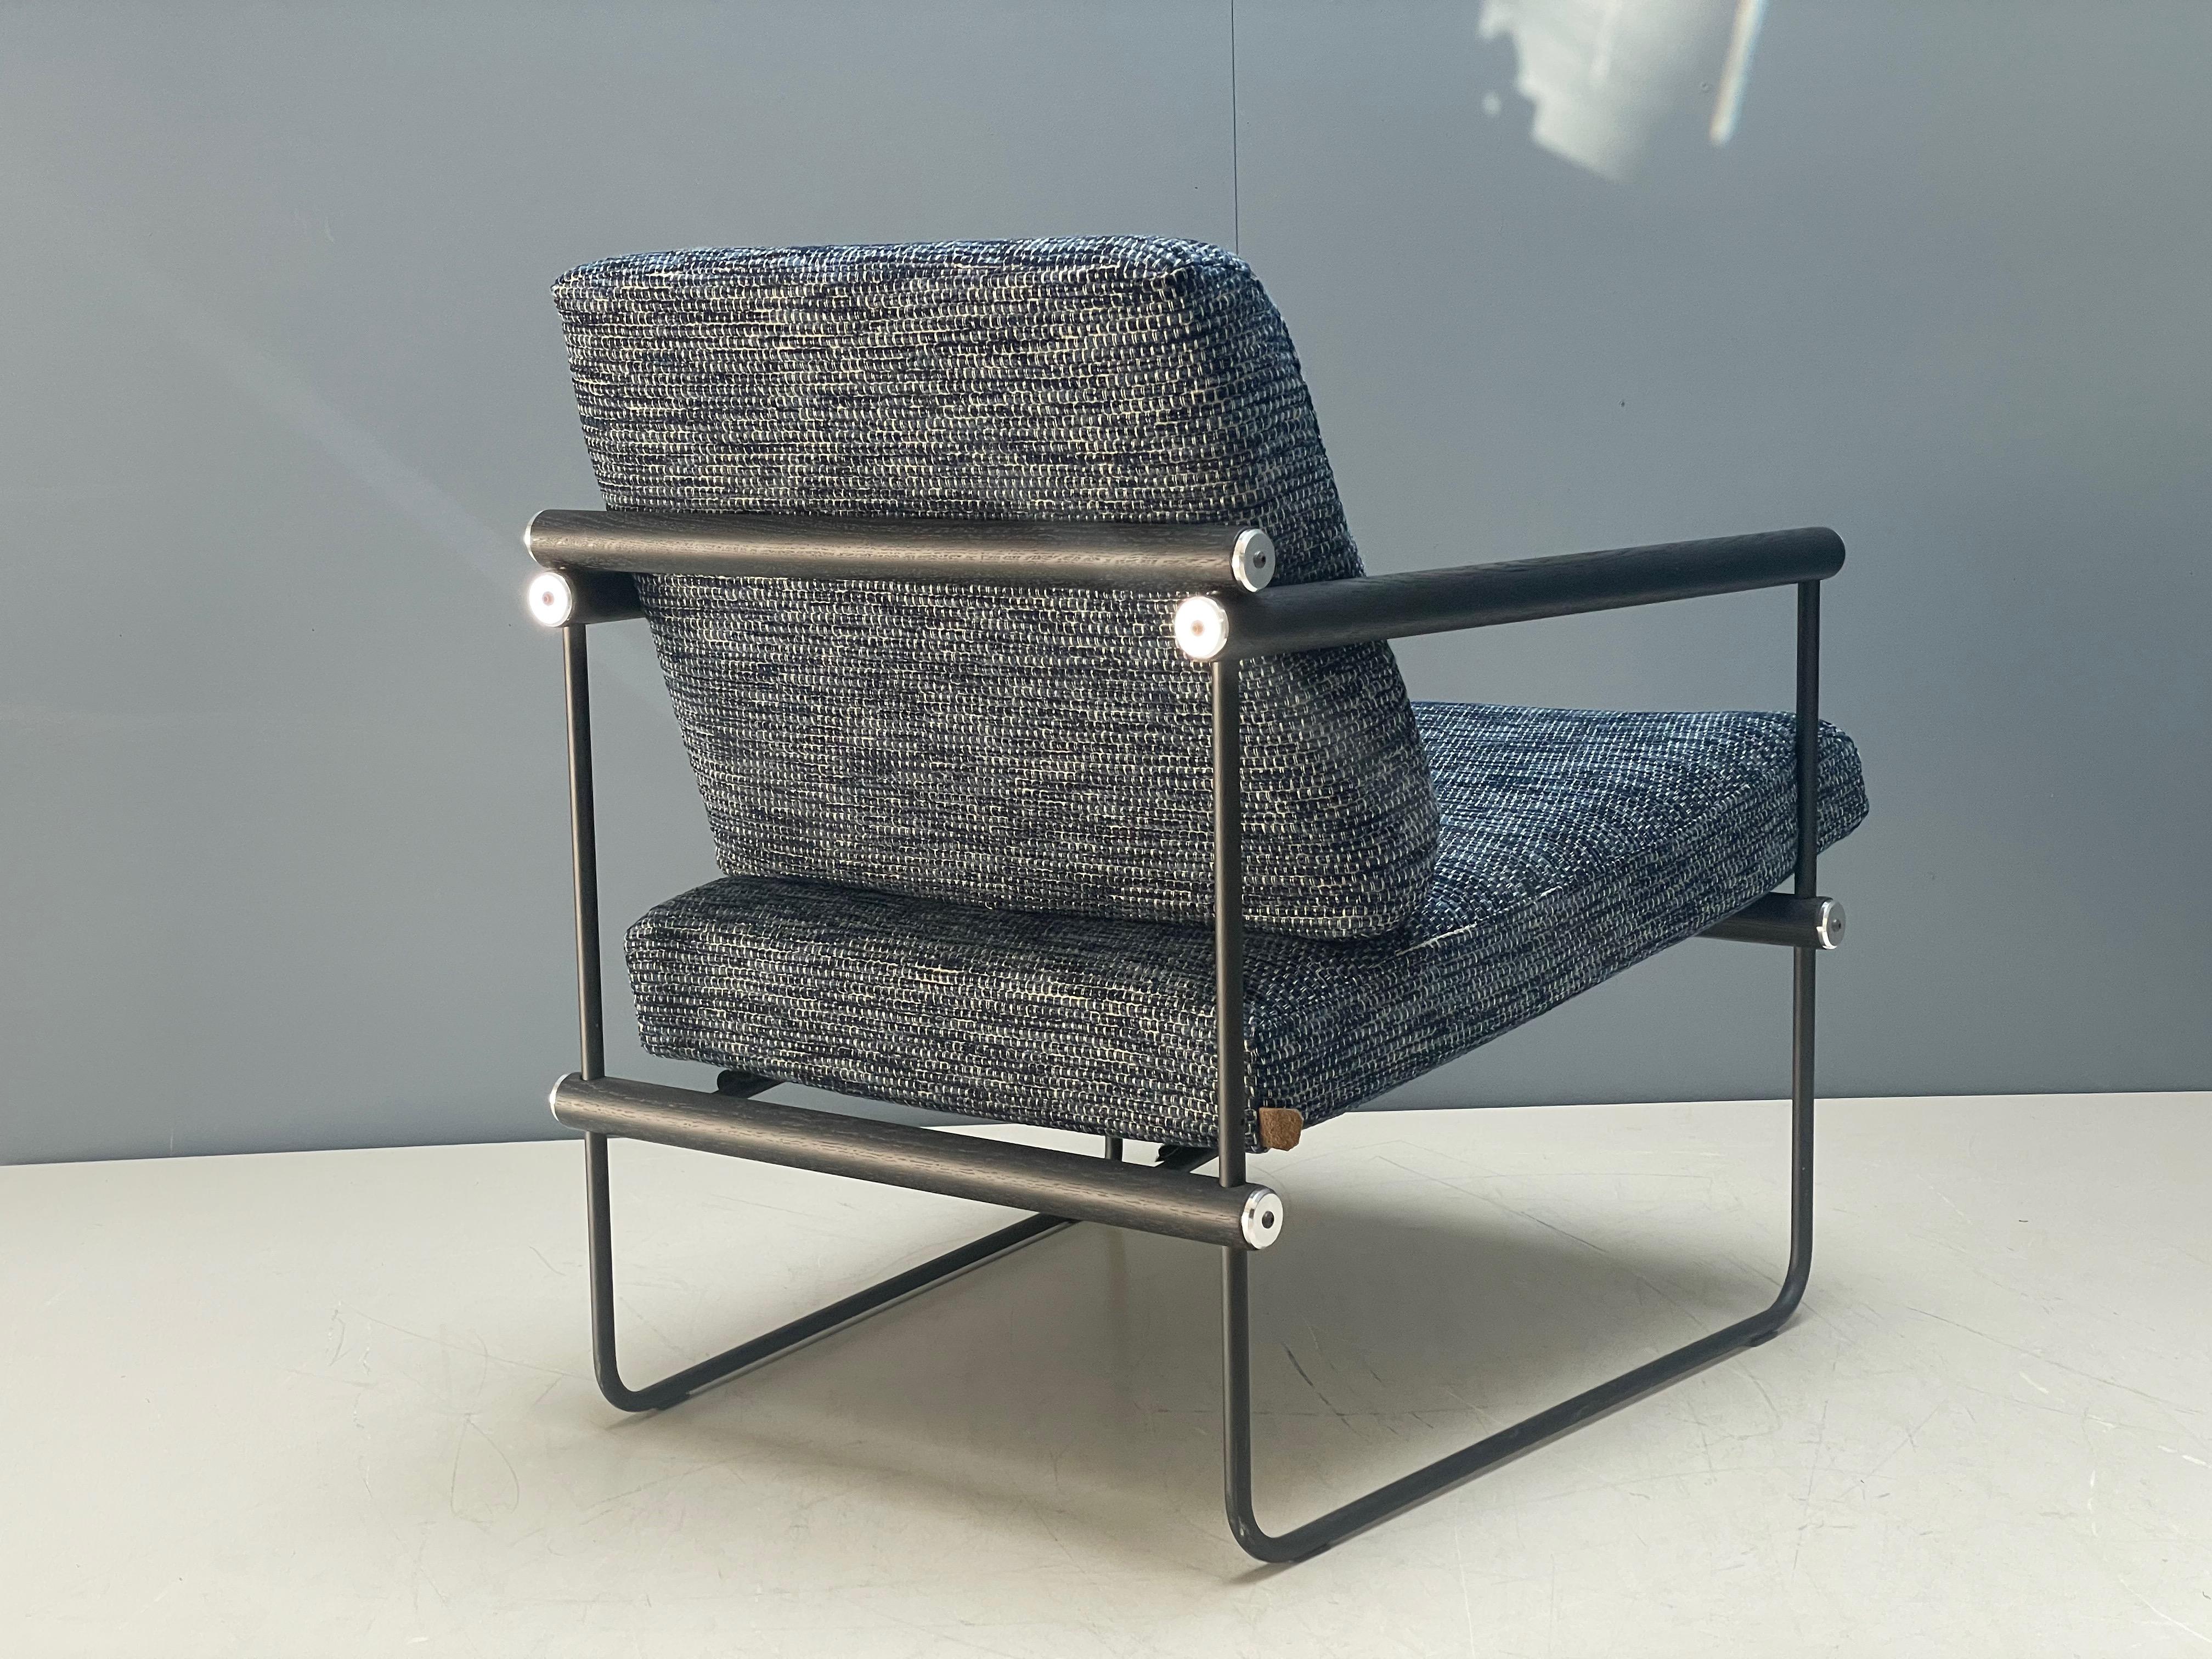 Minimalist Armchair, Black Metal Frame, Light Weight, Blue Upholstery Boucle Ded In Excellent Condition For Sale In Swalmen, NL